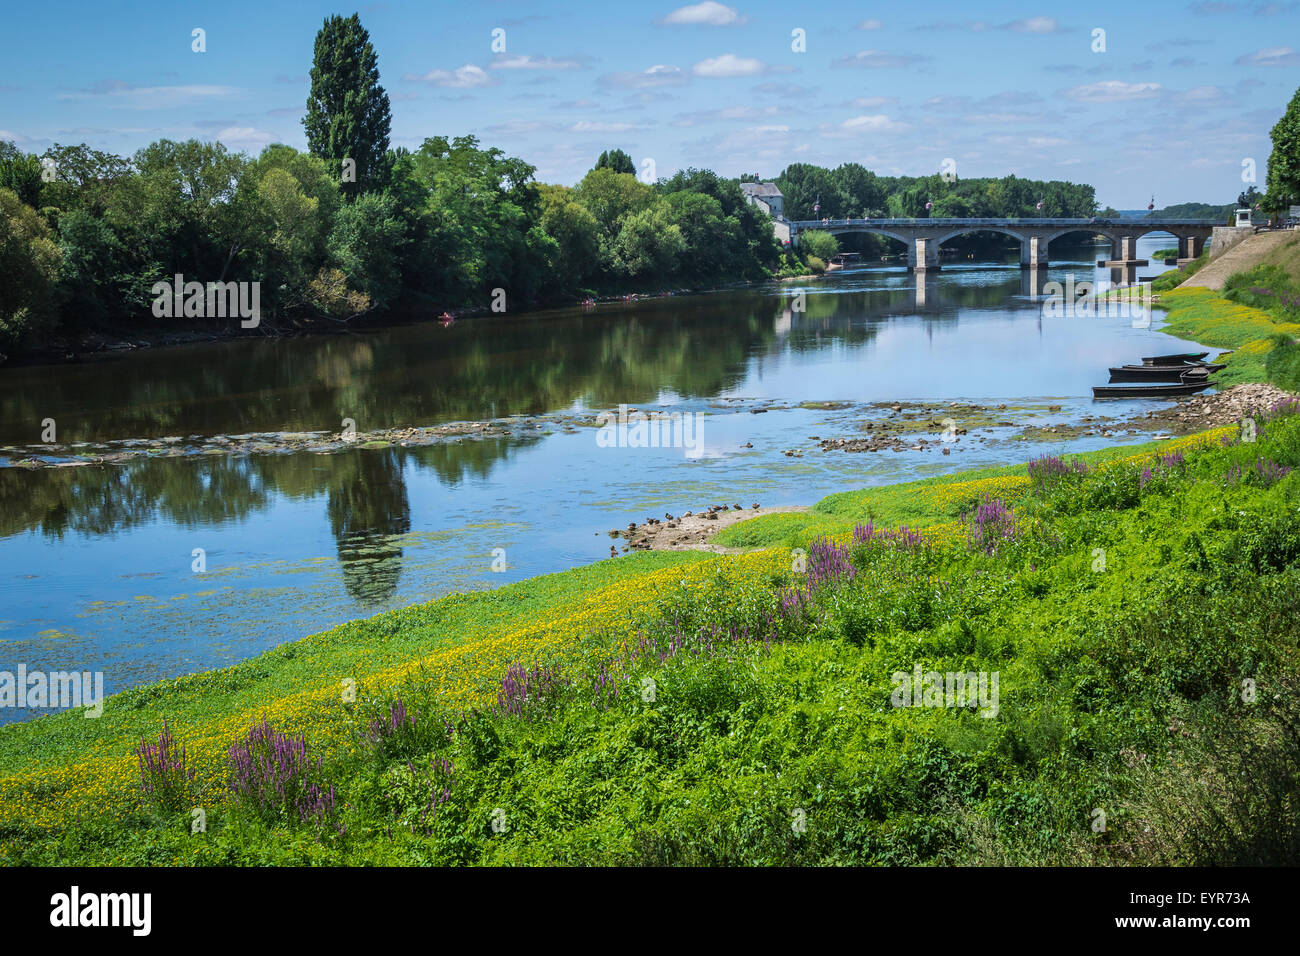 The river La Vienne near L'Île-Bouchard, France. Flowers blooming and boats and the bridge on the background. Stock Photo